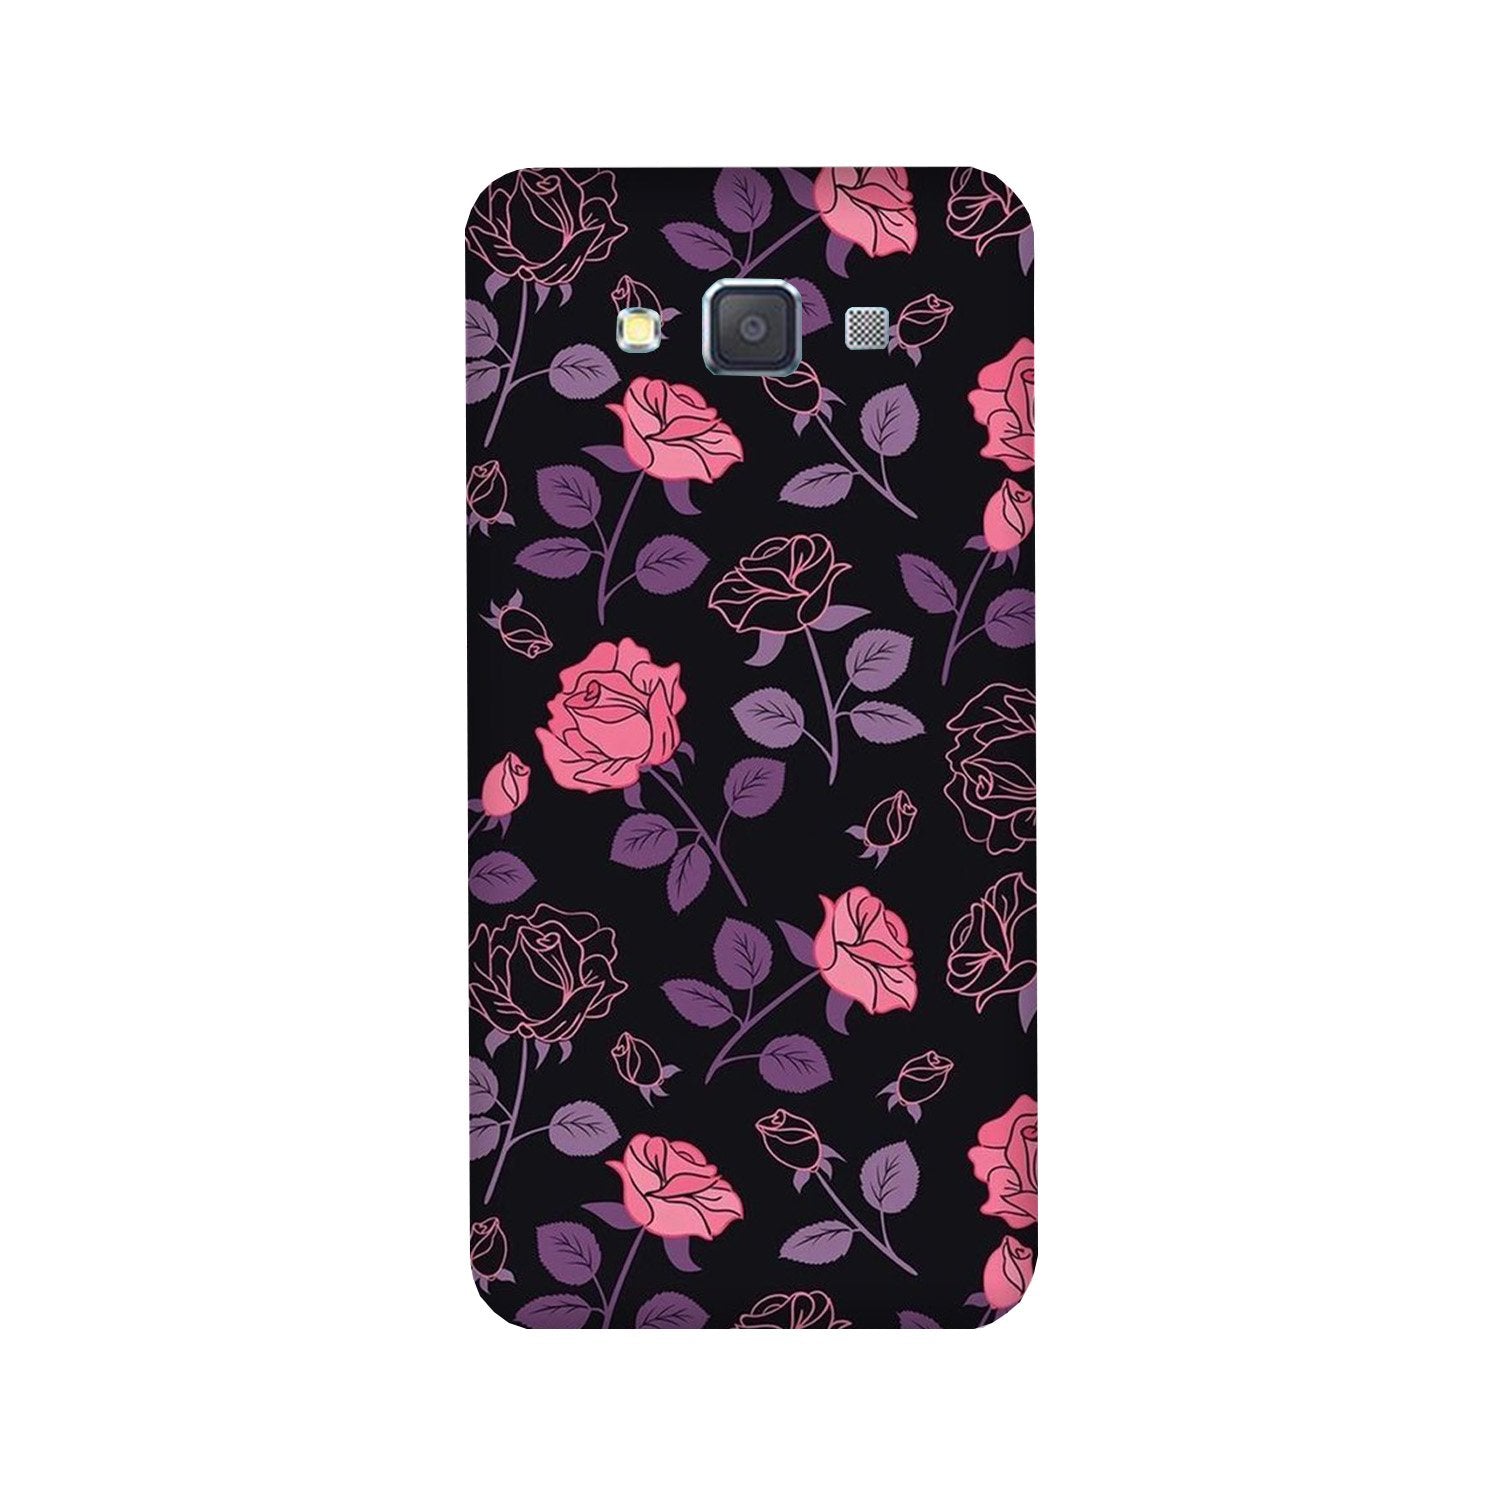 Rose Black Background Case for Galaxy J5 (2016)